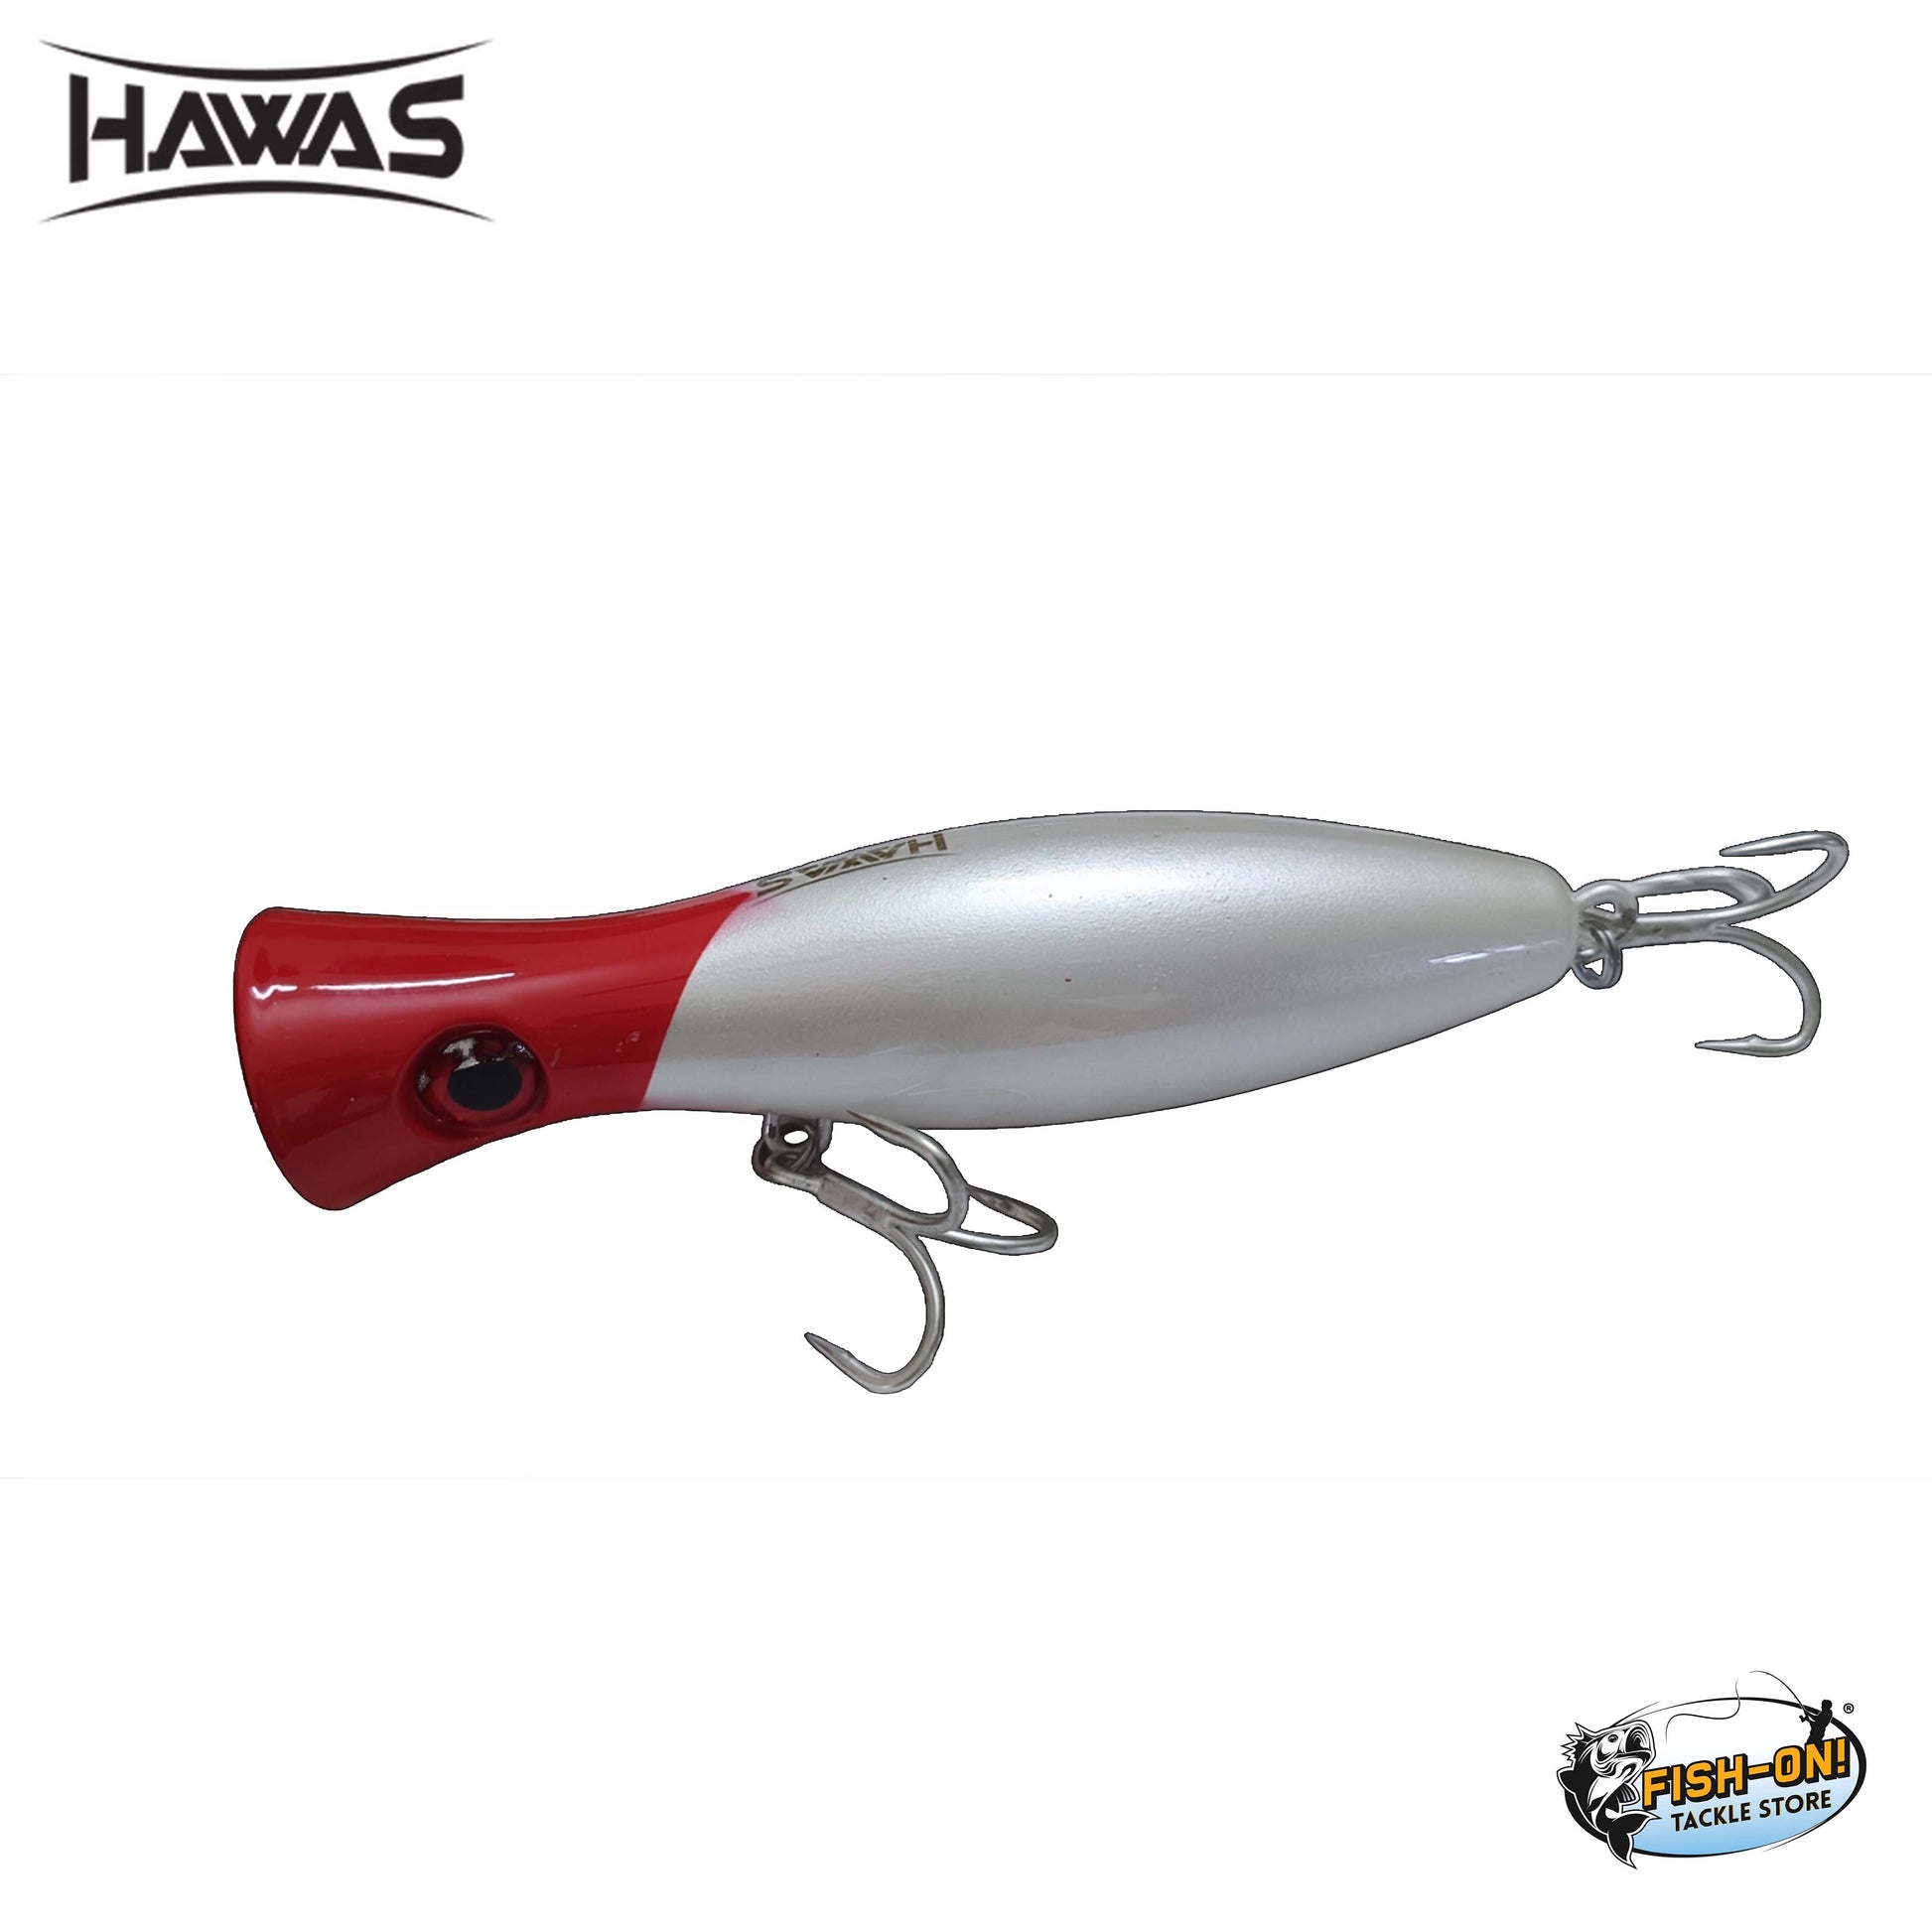 Hawas Popper – Fish-On Tackle Store